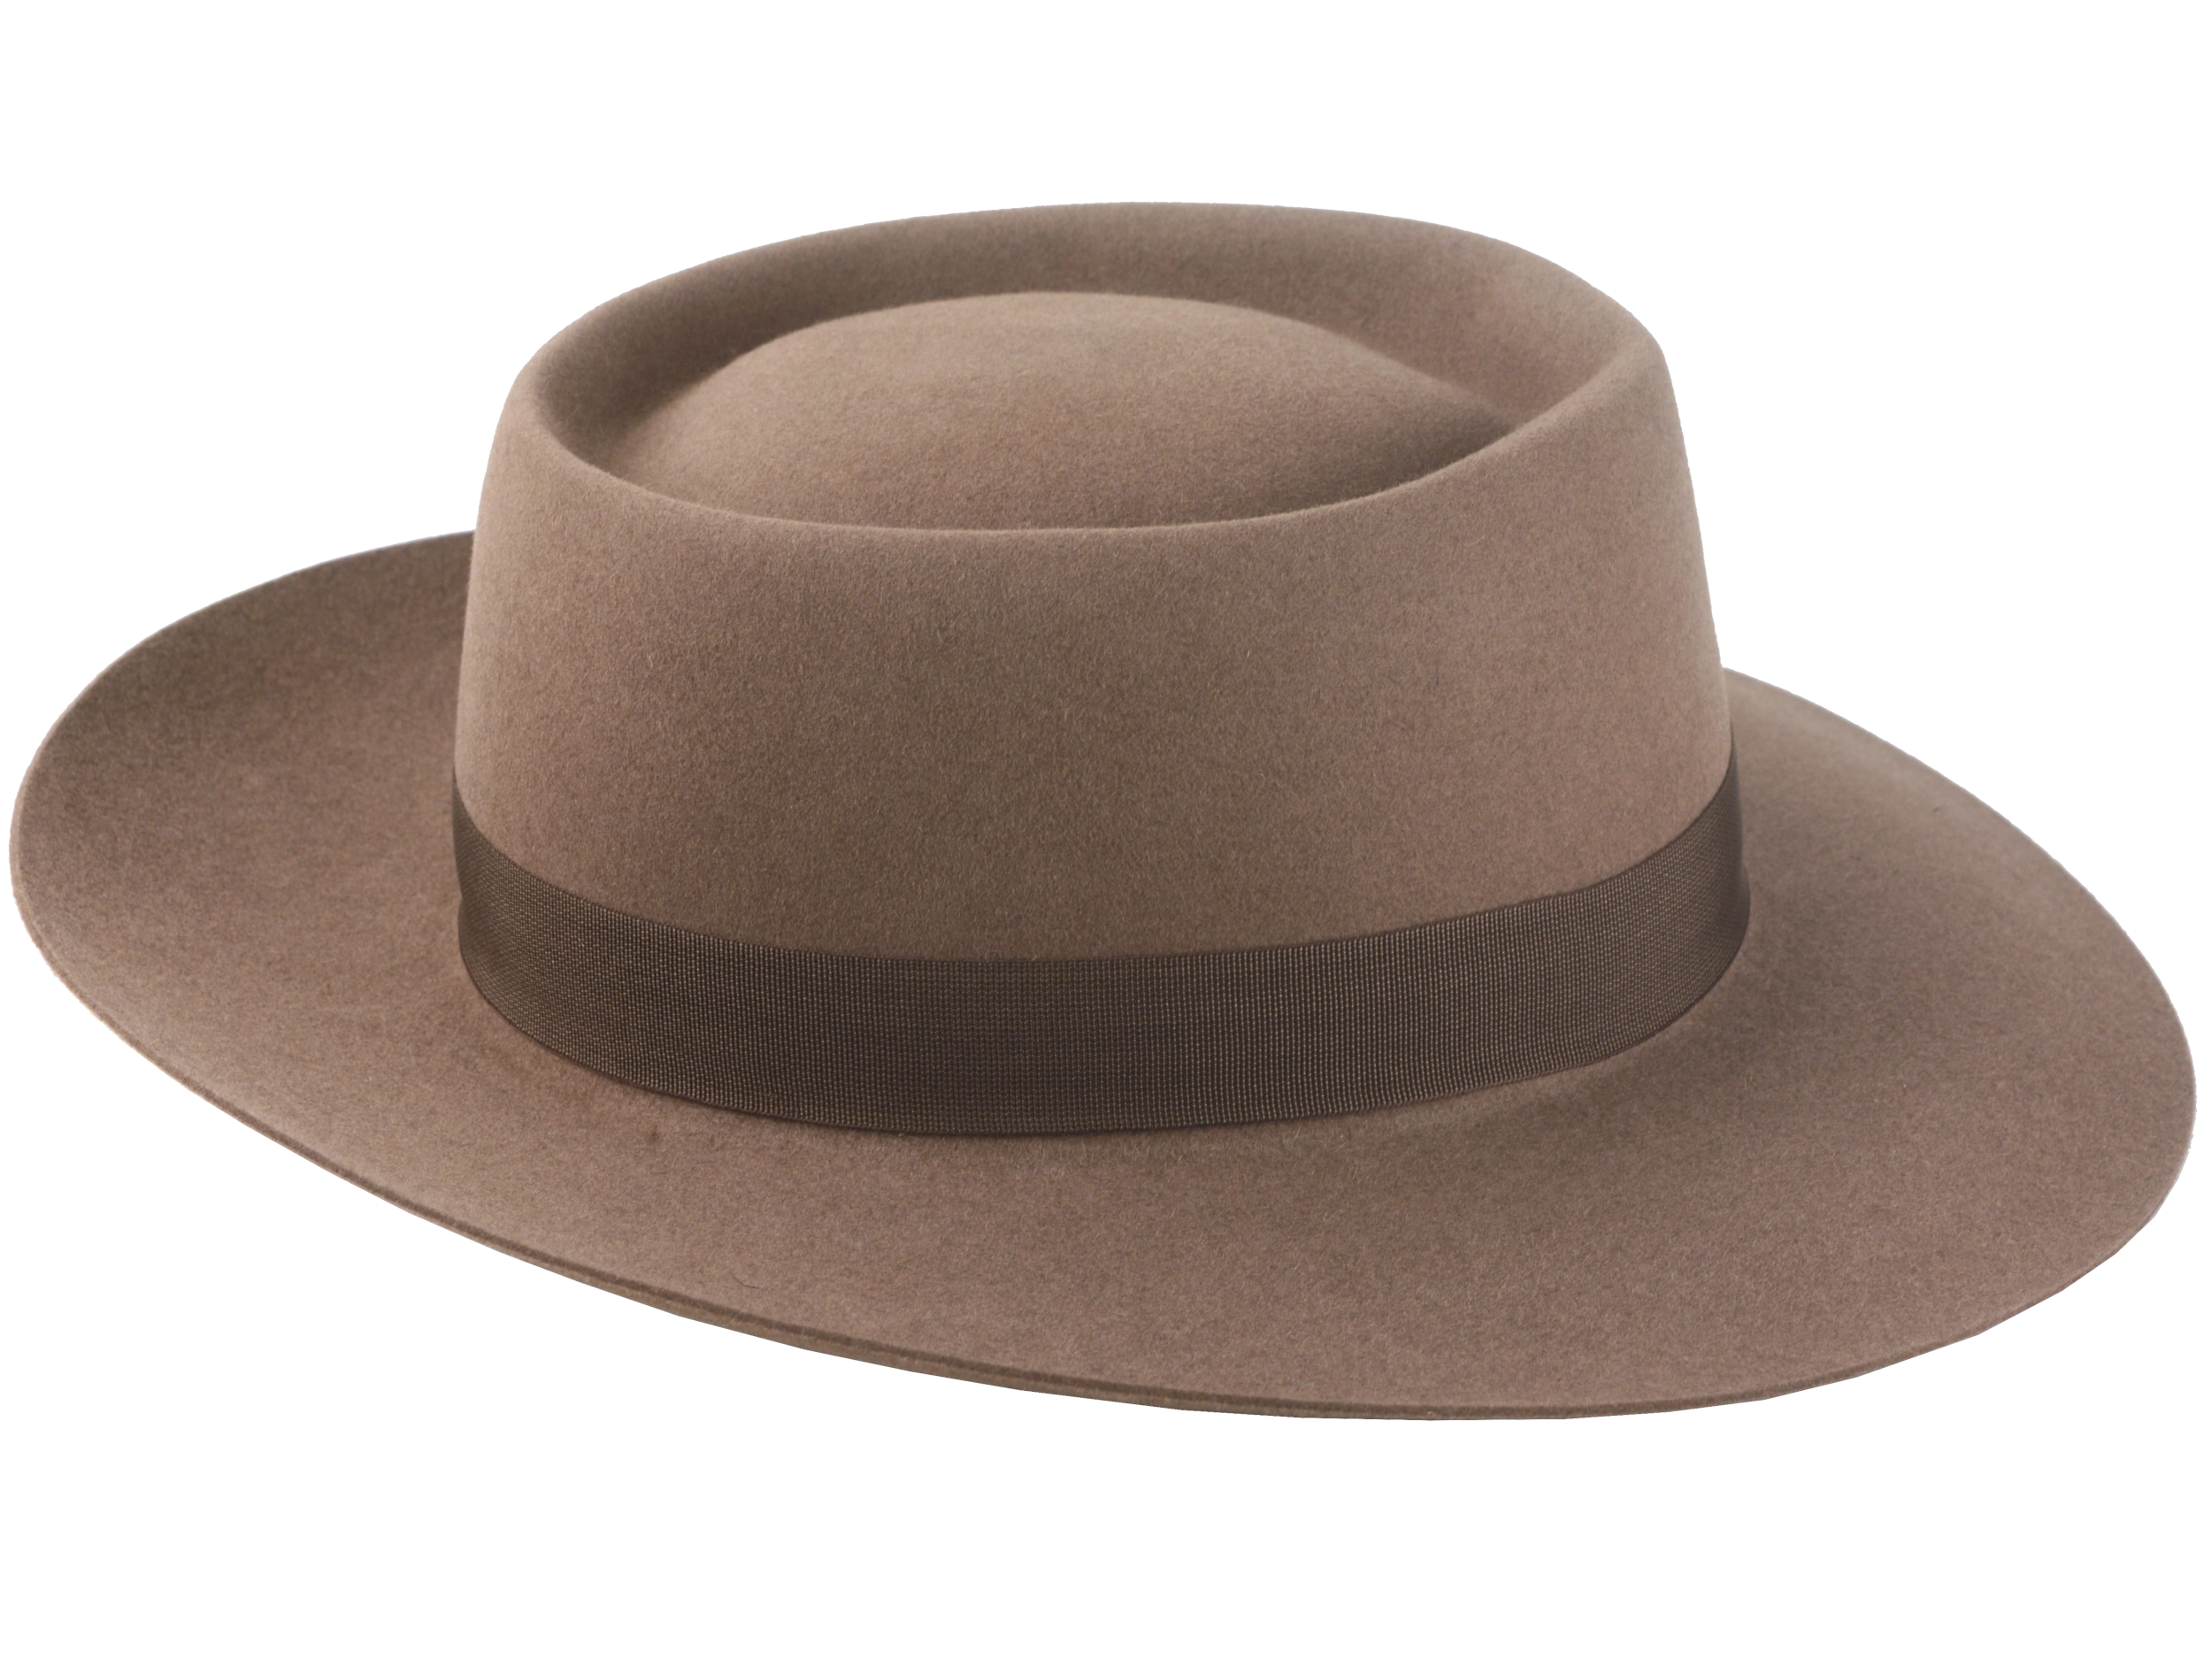 Artisanal wide-brim porkpie hat, named Oppenheimer, in premium beaver felt showcasing the raw edge brim and adorned with a vintage quality ribbon in pecan color against the coffee-hued backdrop of the hat body 5